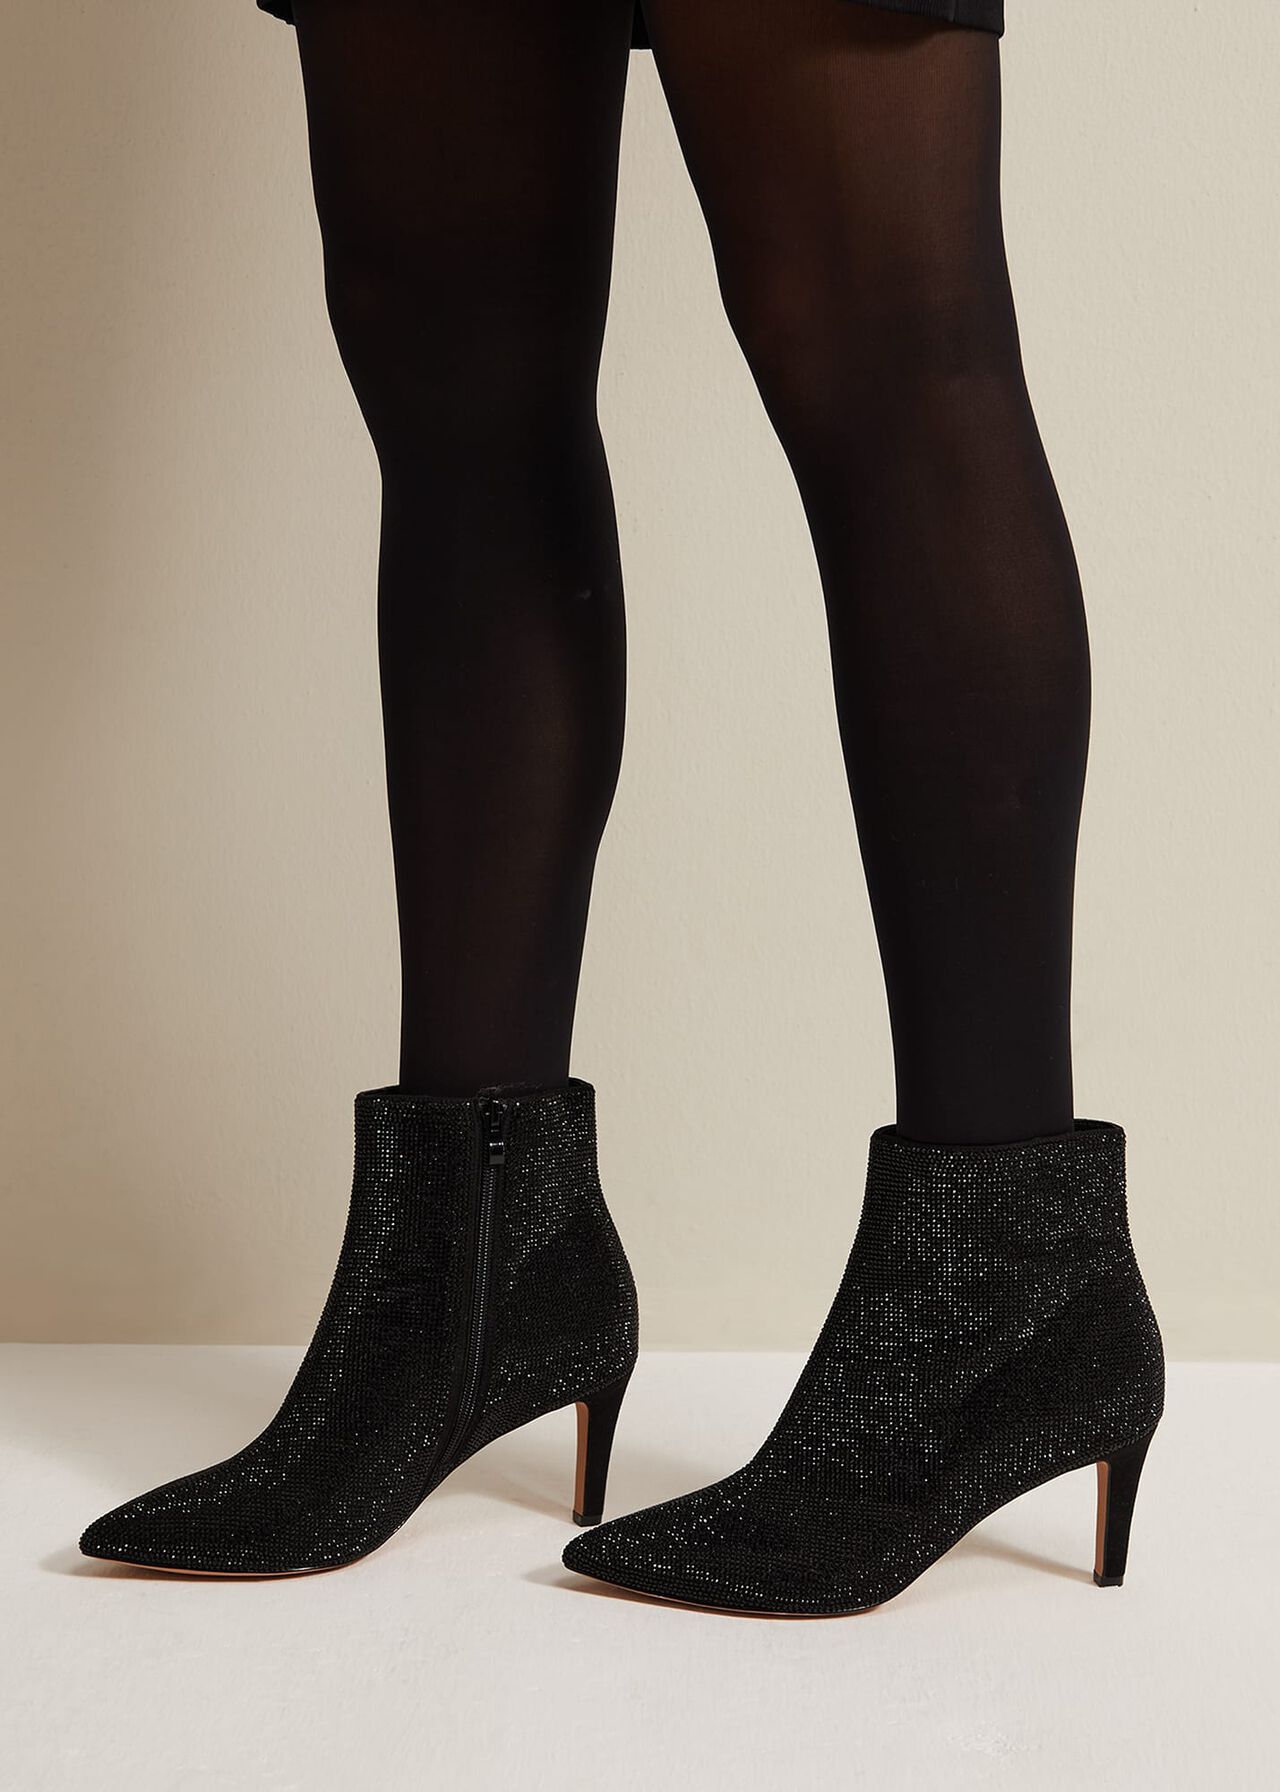 Black Sparkly Boots